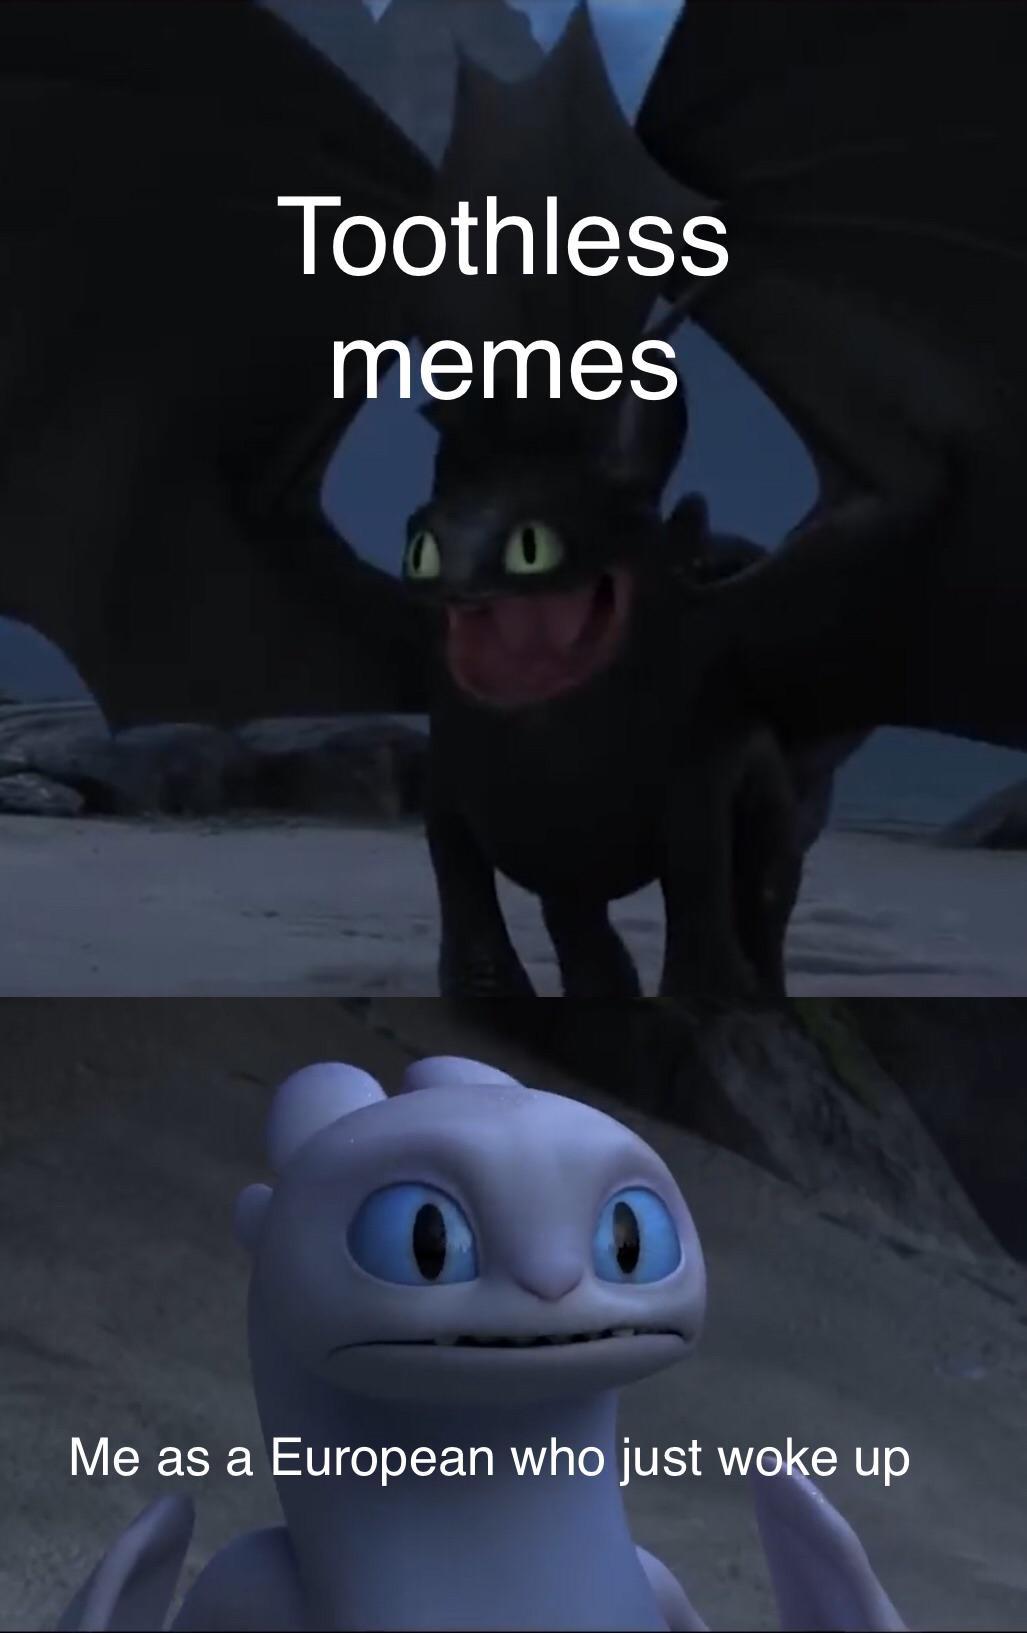 toothless how to train your dragon meme about unsettled toothless meme - Toothless memes Me as a European who just woke up